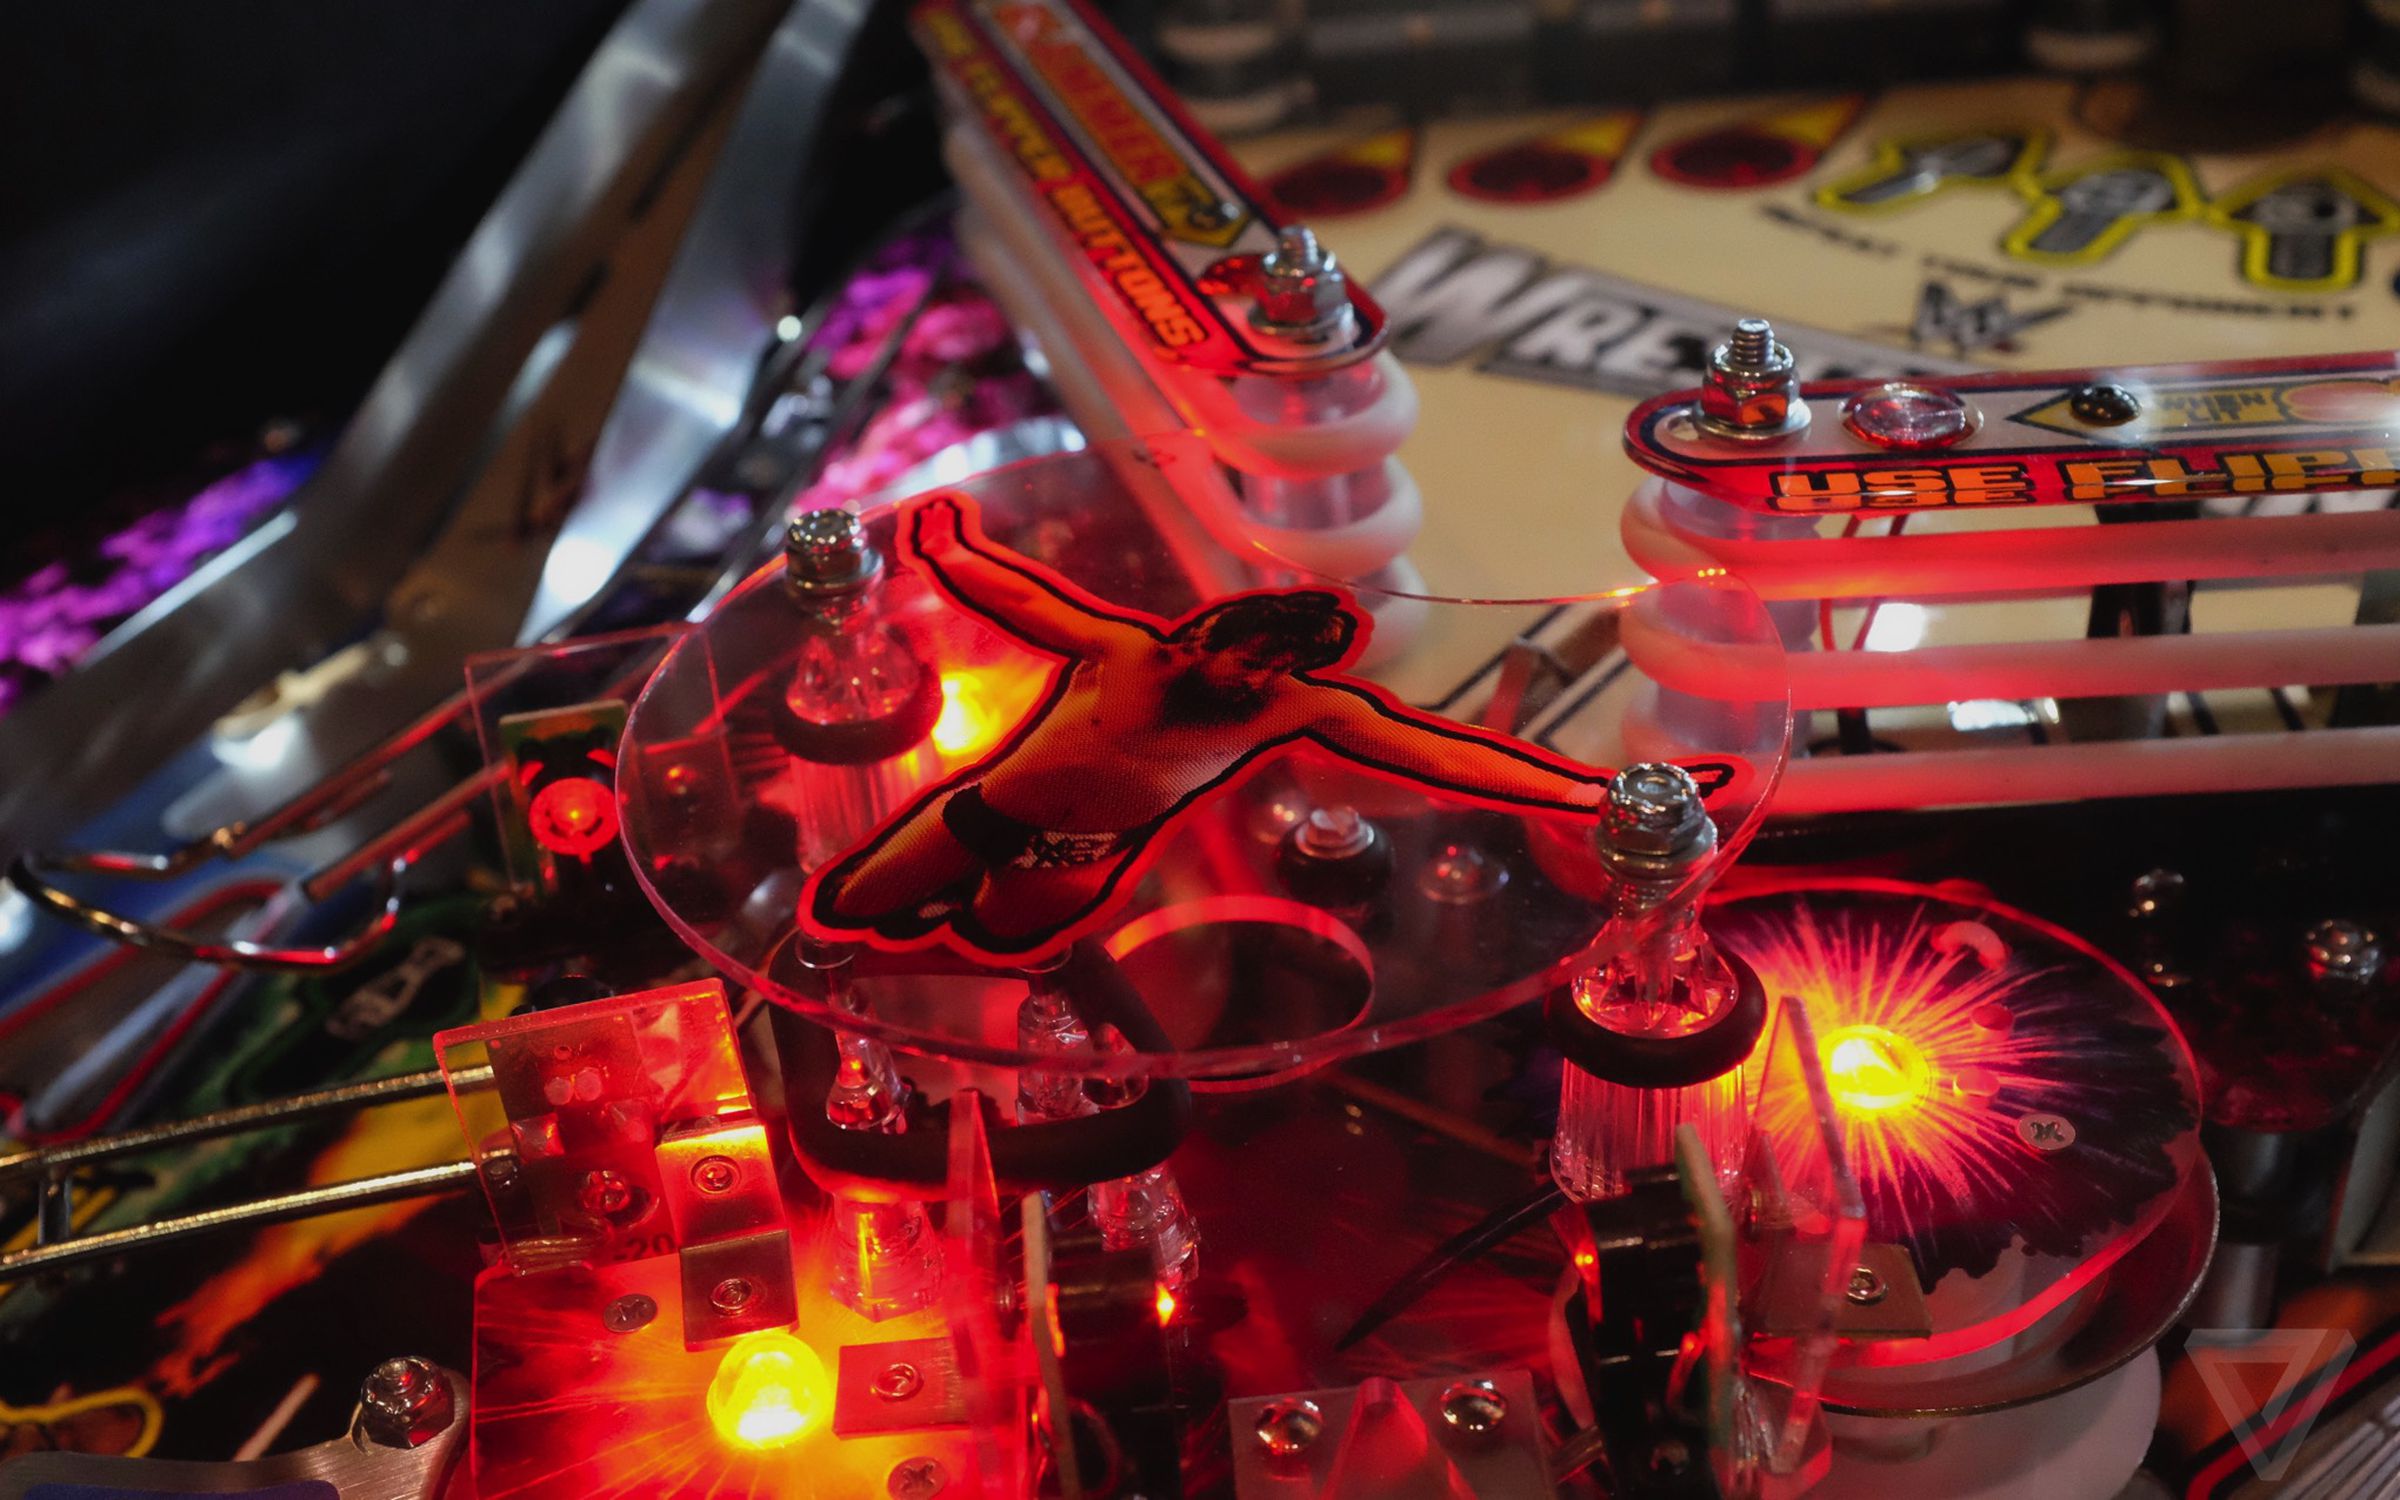 Stern's Wrestlemania pinball table at CES 2015